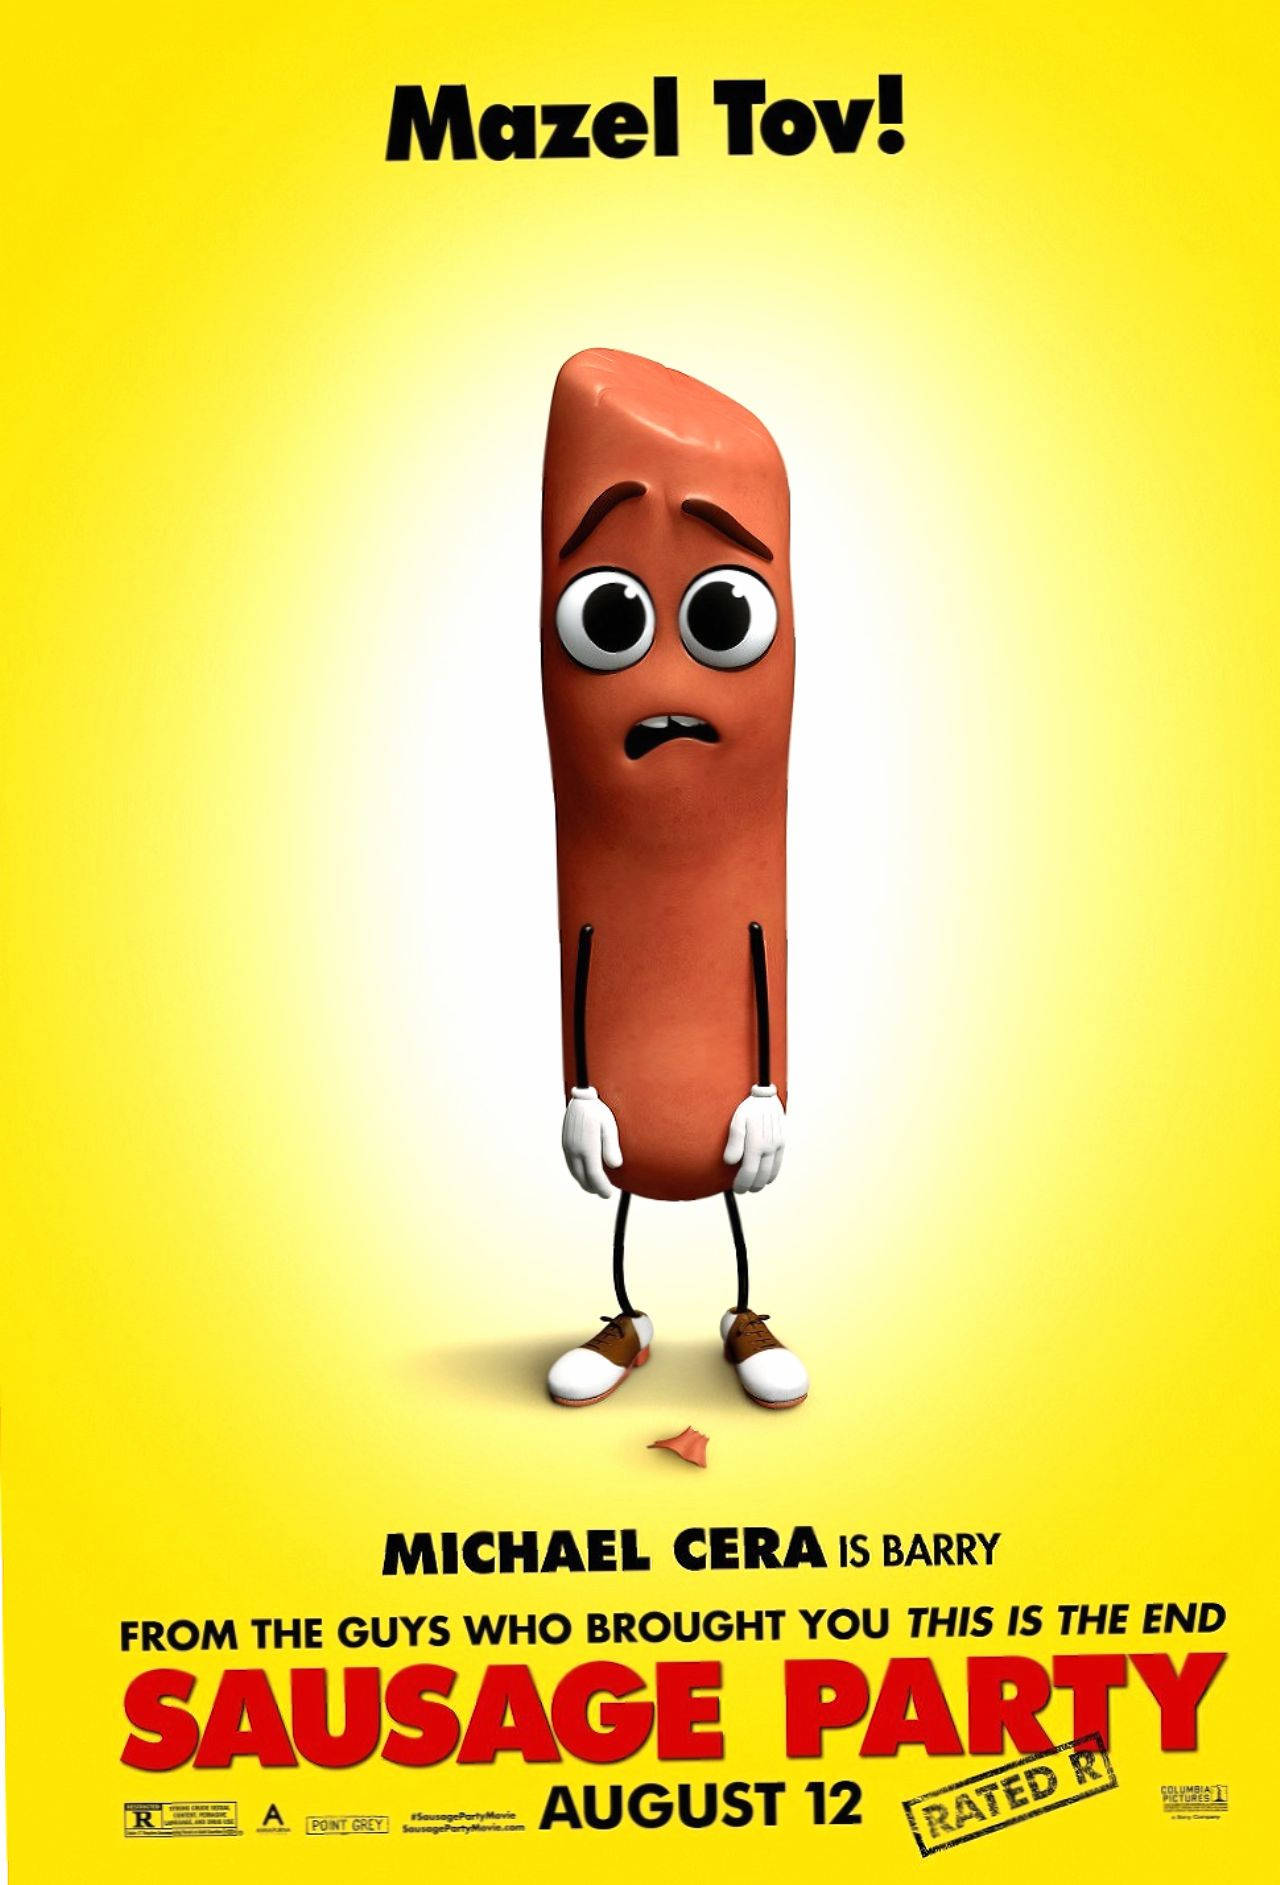 Barry Sausage Party Plakat Wallpaper